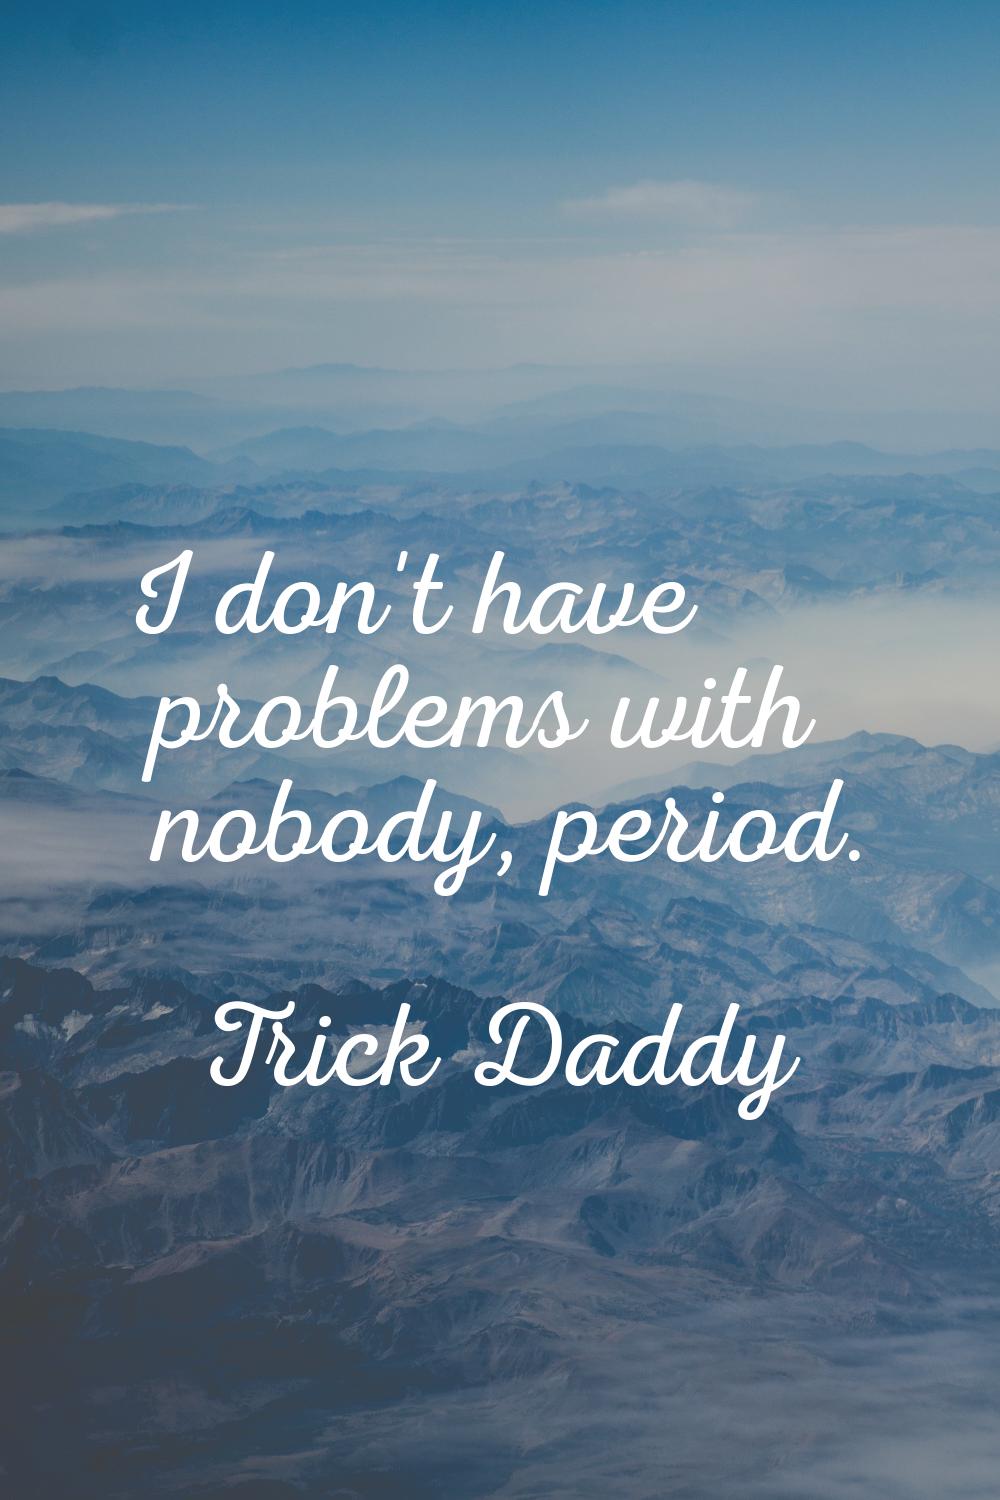 I don't have problems with nobody, period.